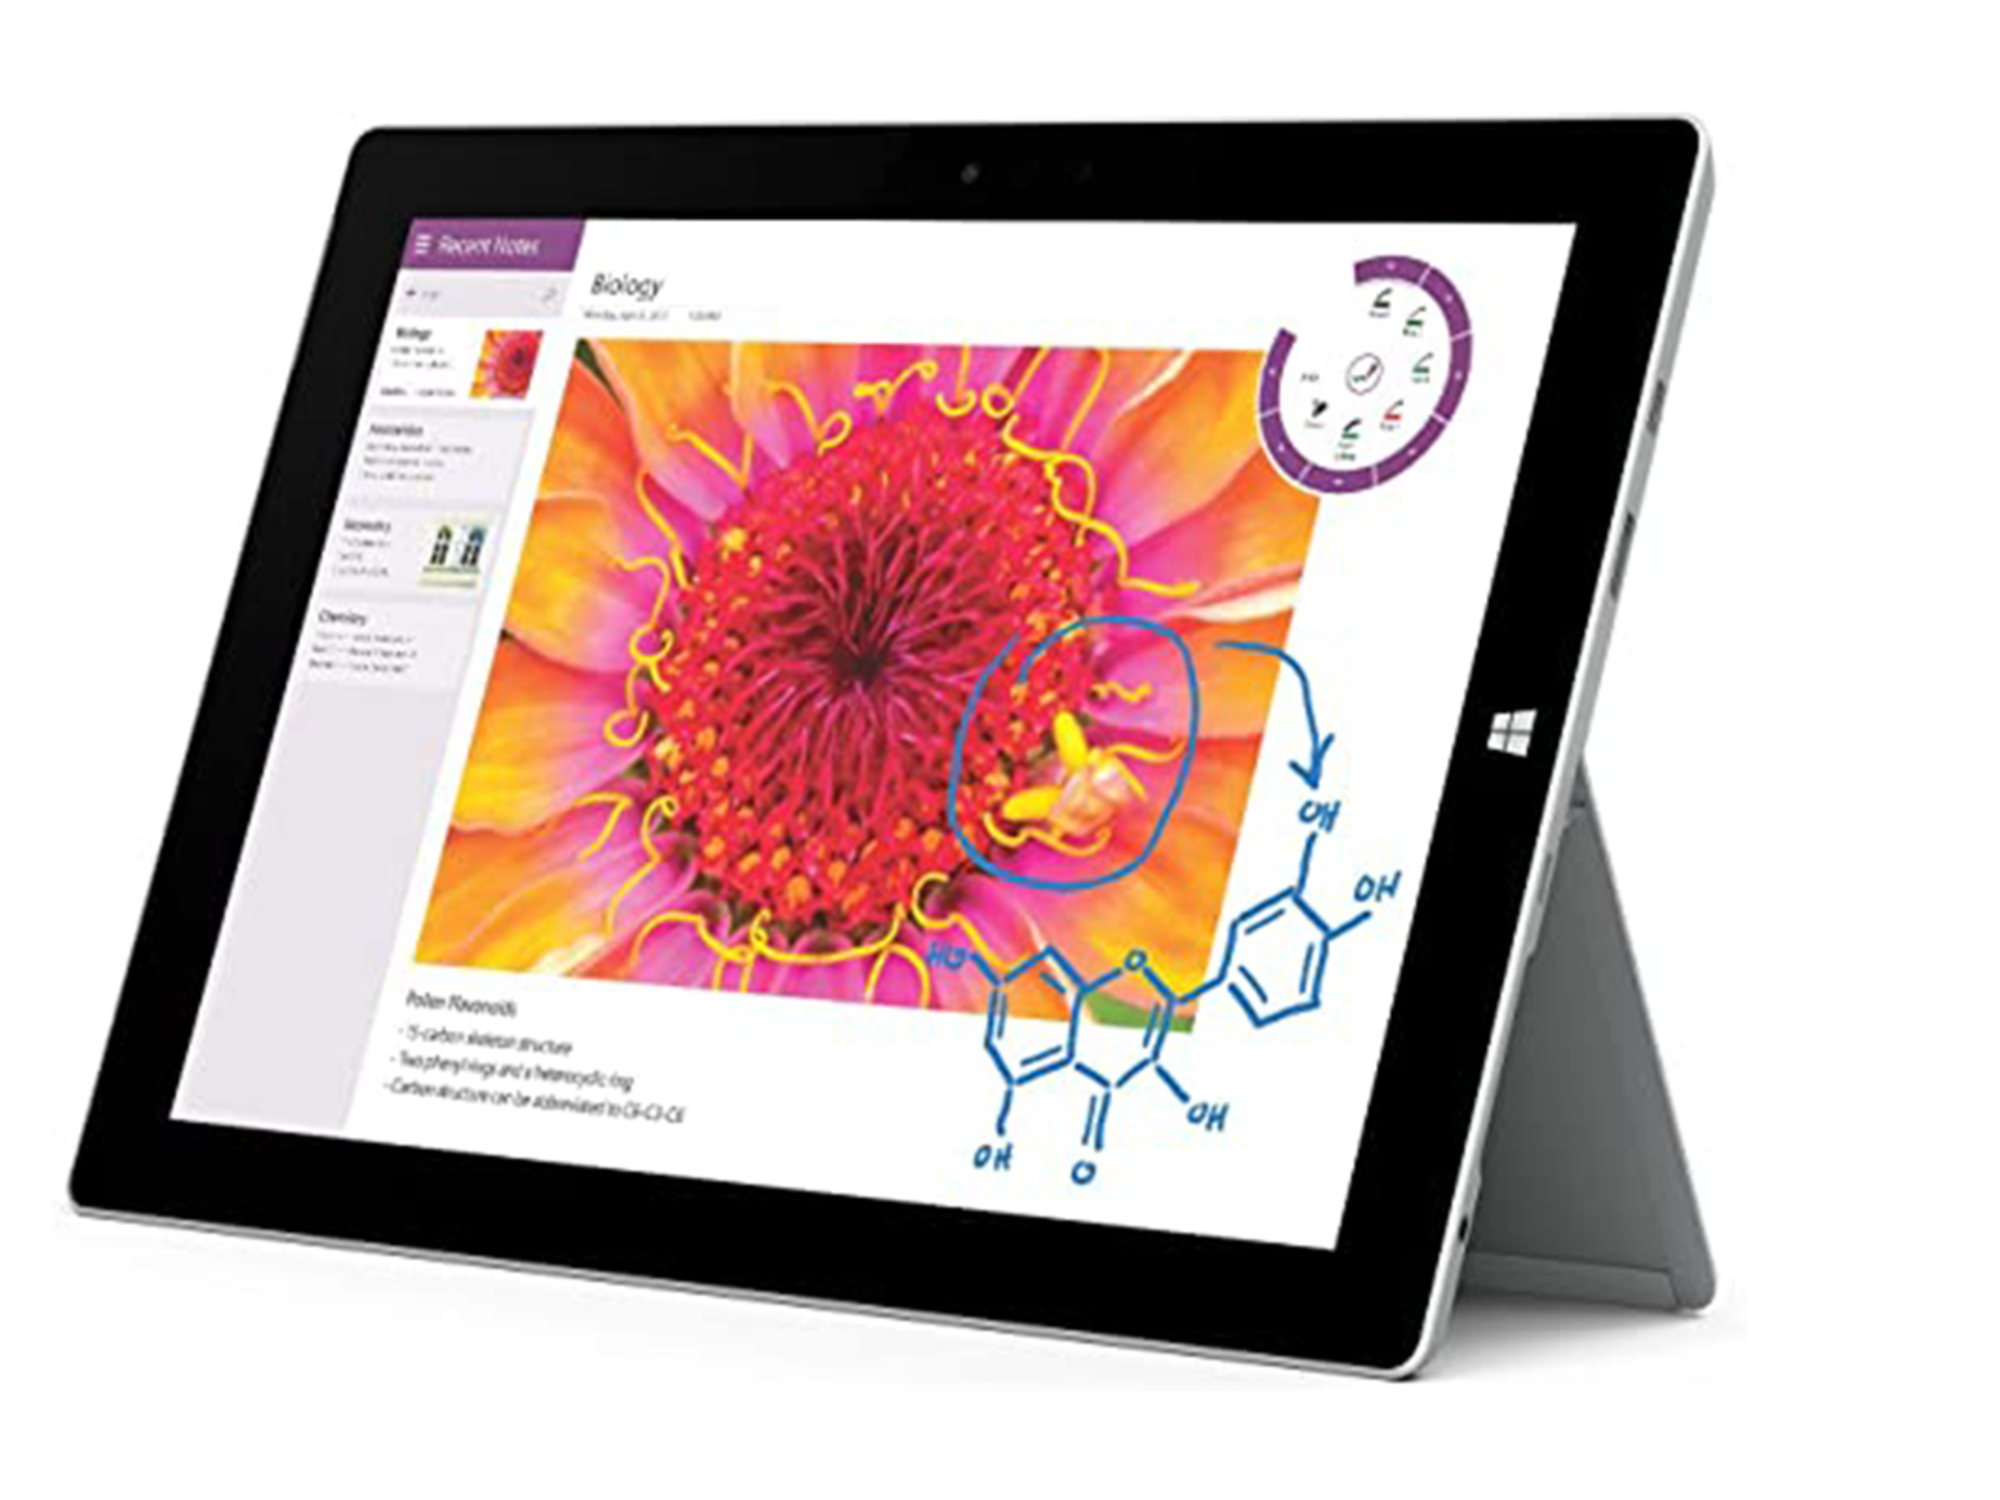 Pick up this refurbished Microsoft Surface 3 for $200